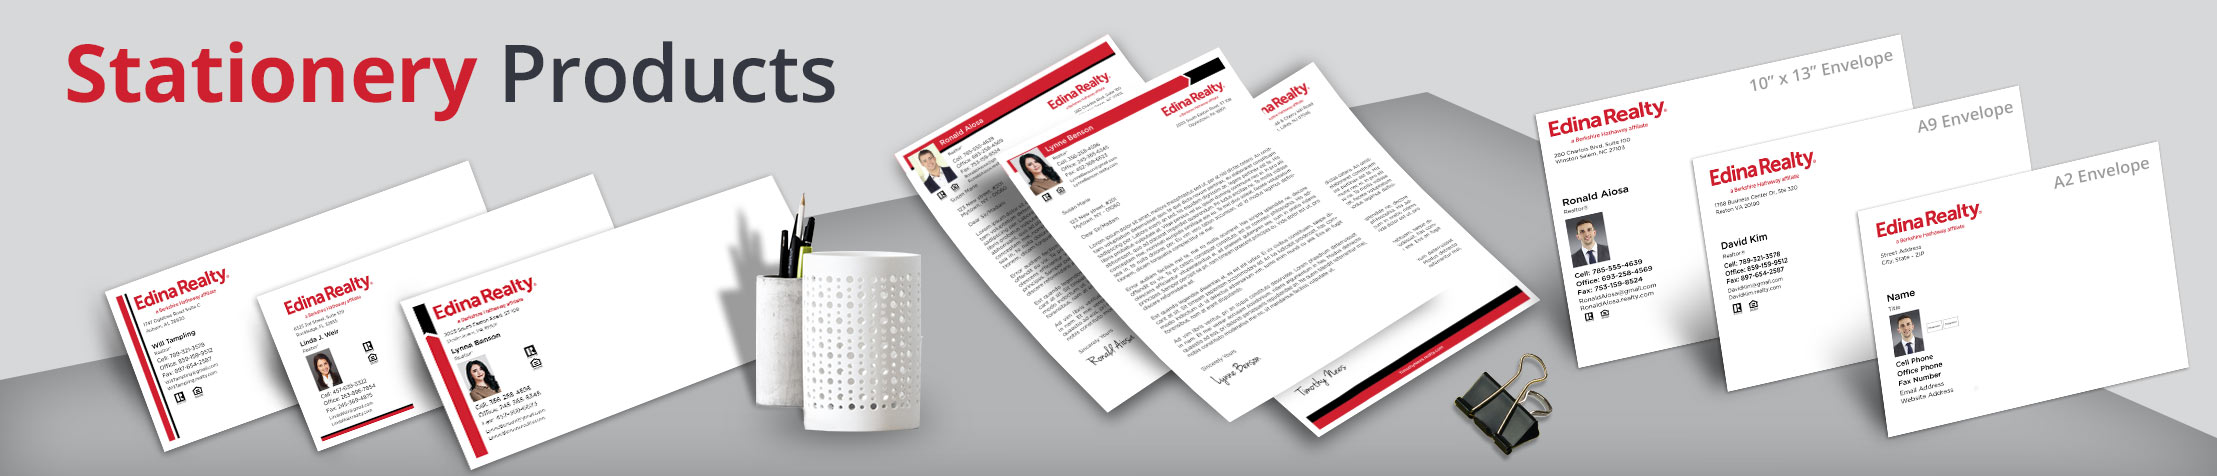 Edina Realty Real Estate Stationery Products - Custom Letterhead & Envelopes Stationery Products for Realtors | BestPrintBuy.com